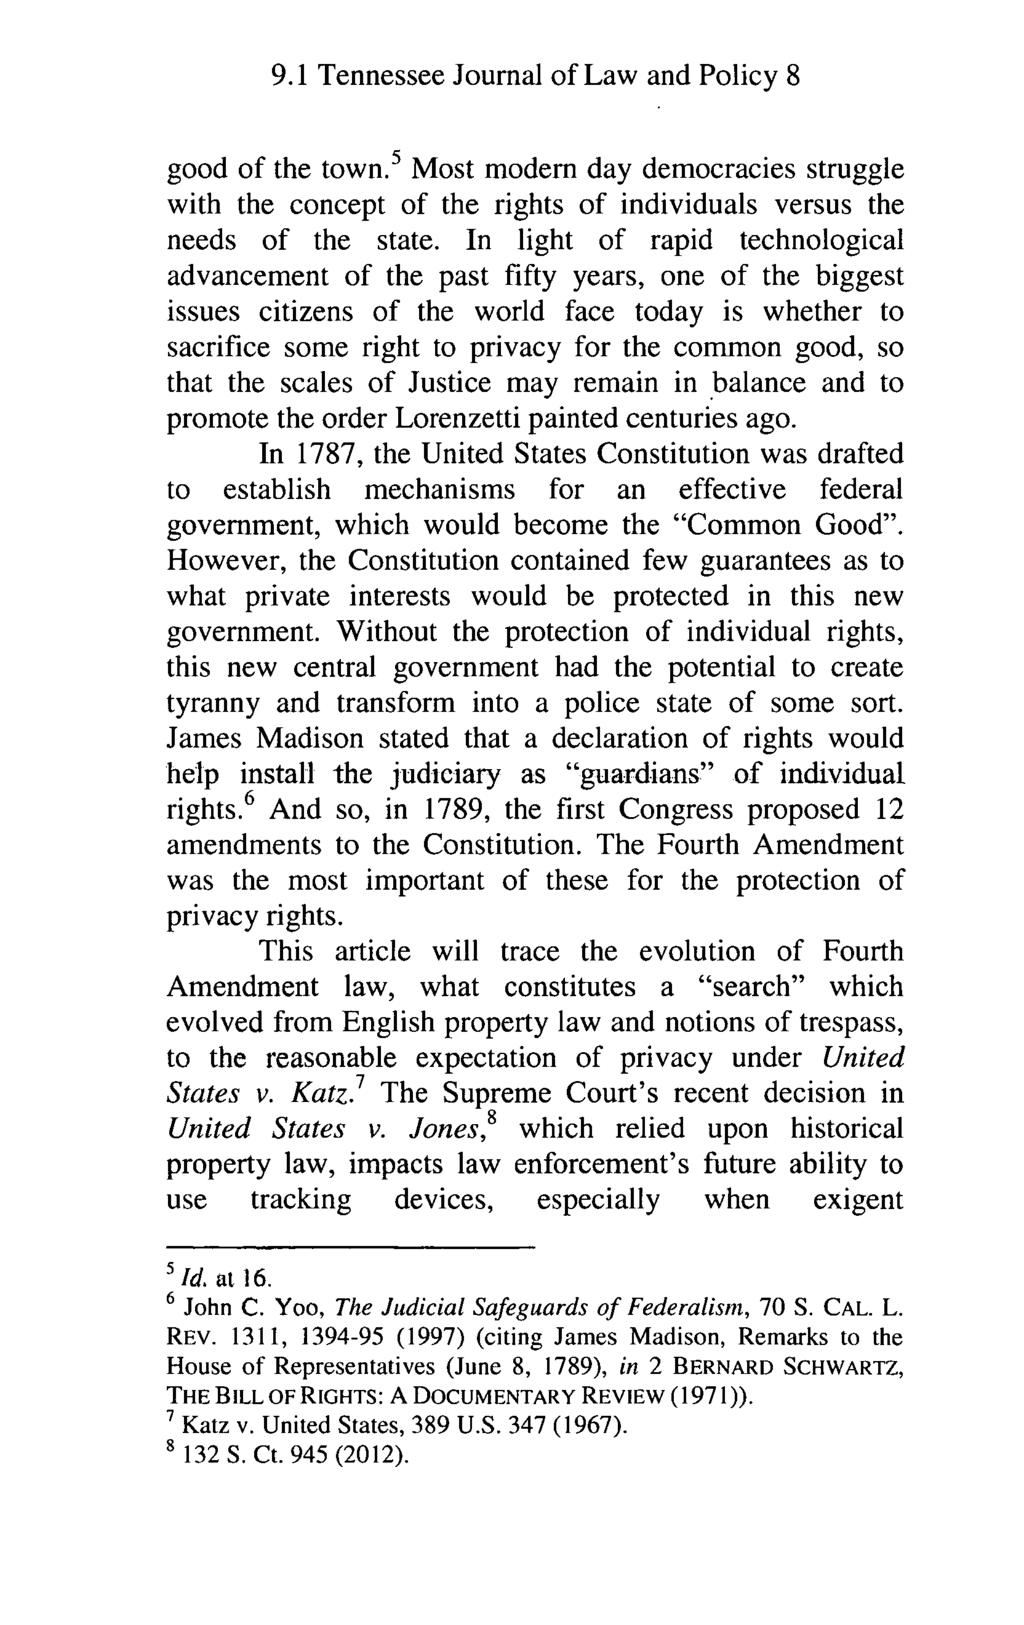 Tennessee Journal of Law and Policy, Vol. 9, Iss. 1 [2013], Art. 3 9.1 Tennessee Journal of Law and Policy 8 good of the town.